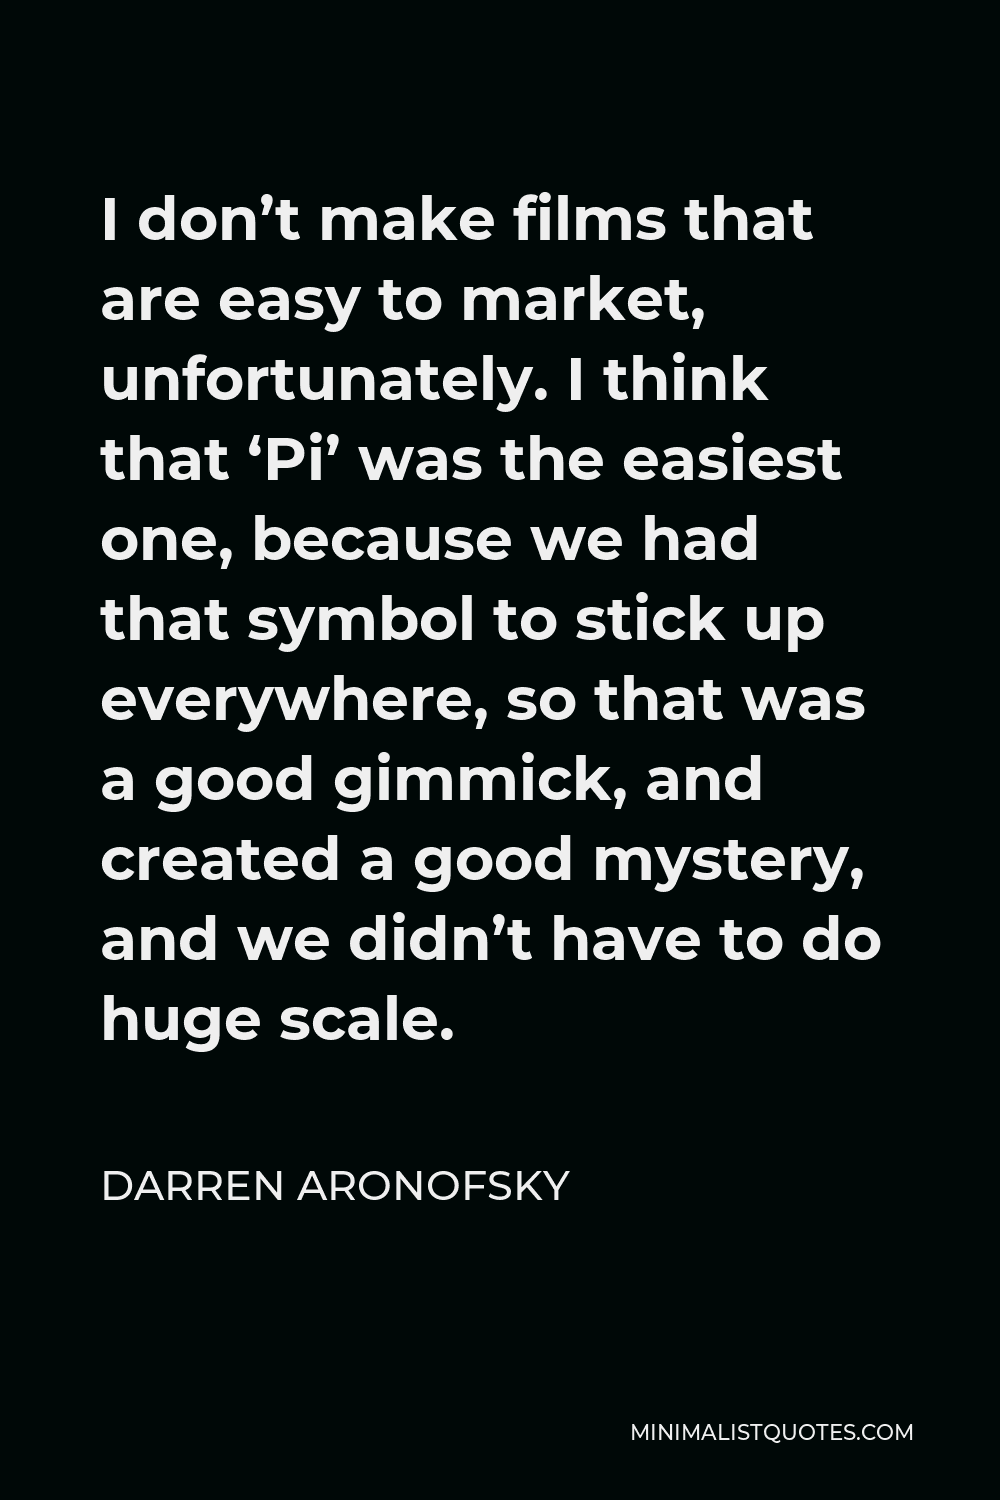 Darren Aronofsky Quote - I don’t make films that are easy to market, unfortunately. I think that ‘Pi’ was the easiest one, because we had that symbol to stick up everywhere, so that was a good gimmick, and created a good mystery, and we didn’t have to do huge scale.